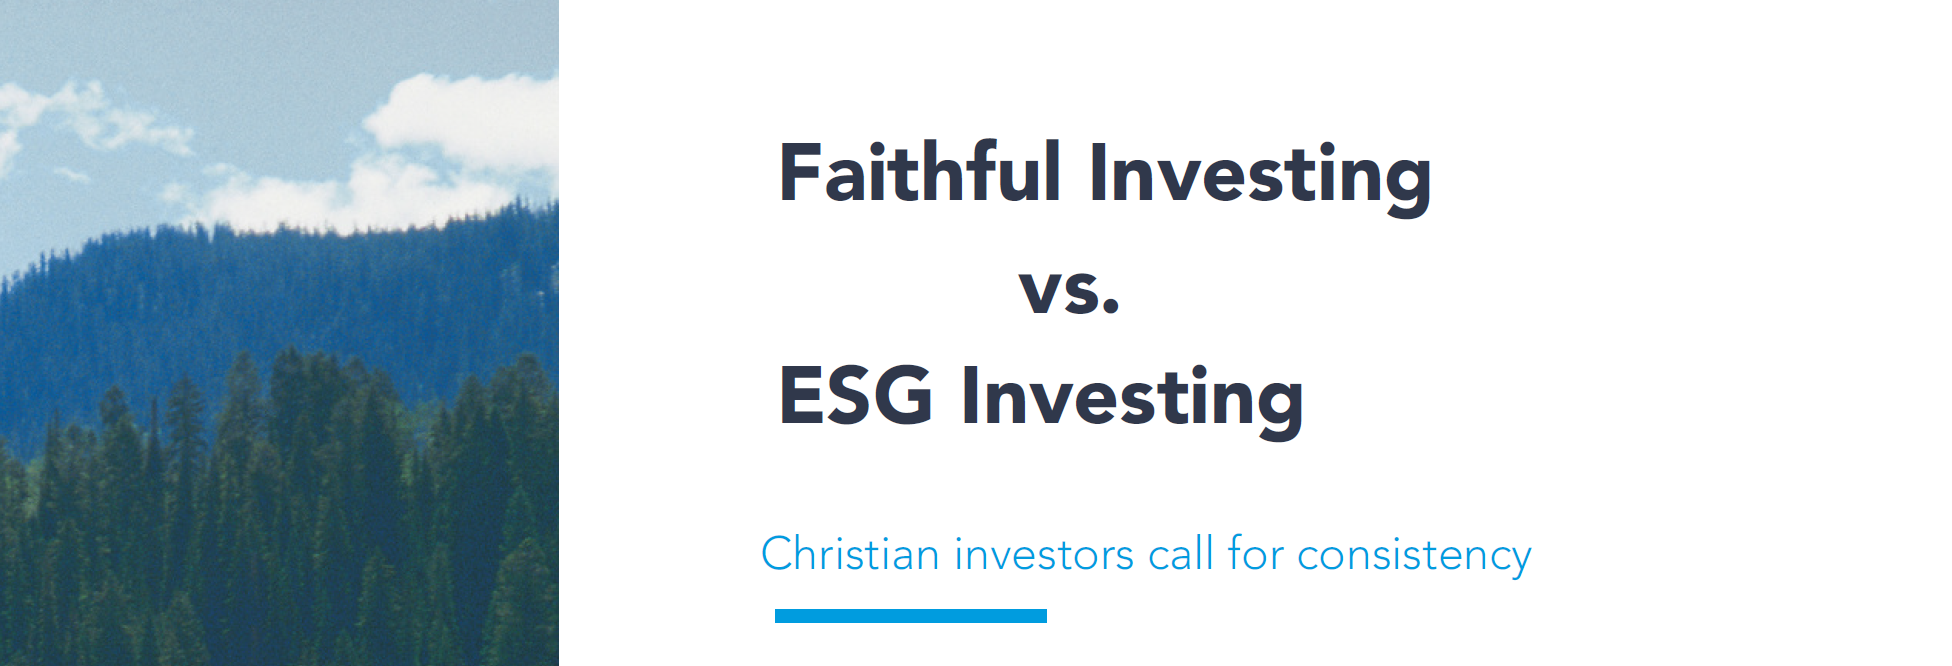 You are currently viewing Faithful Investing vs. ESG Investing